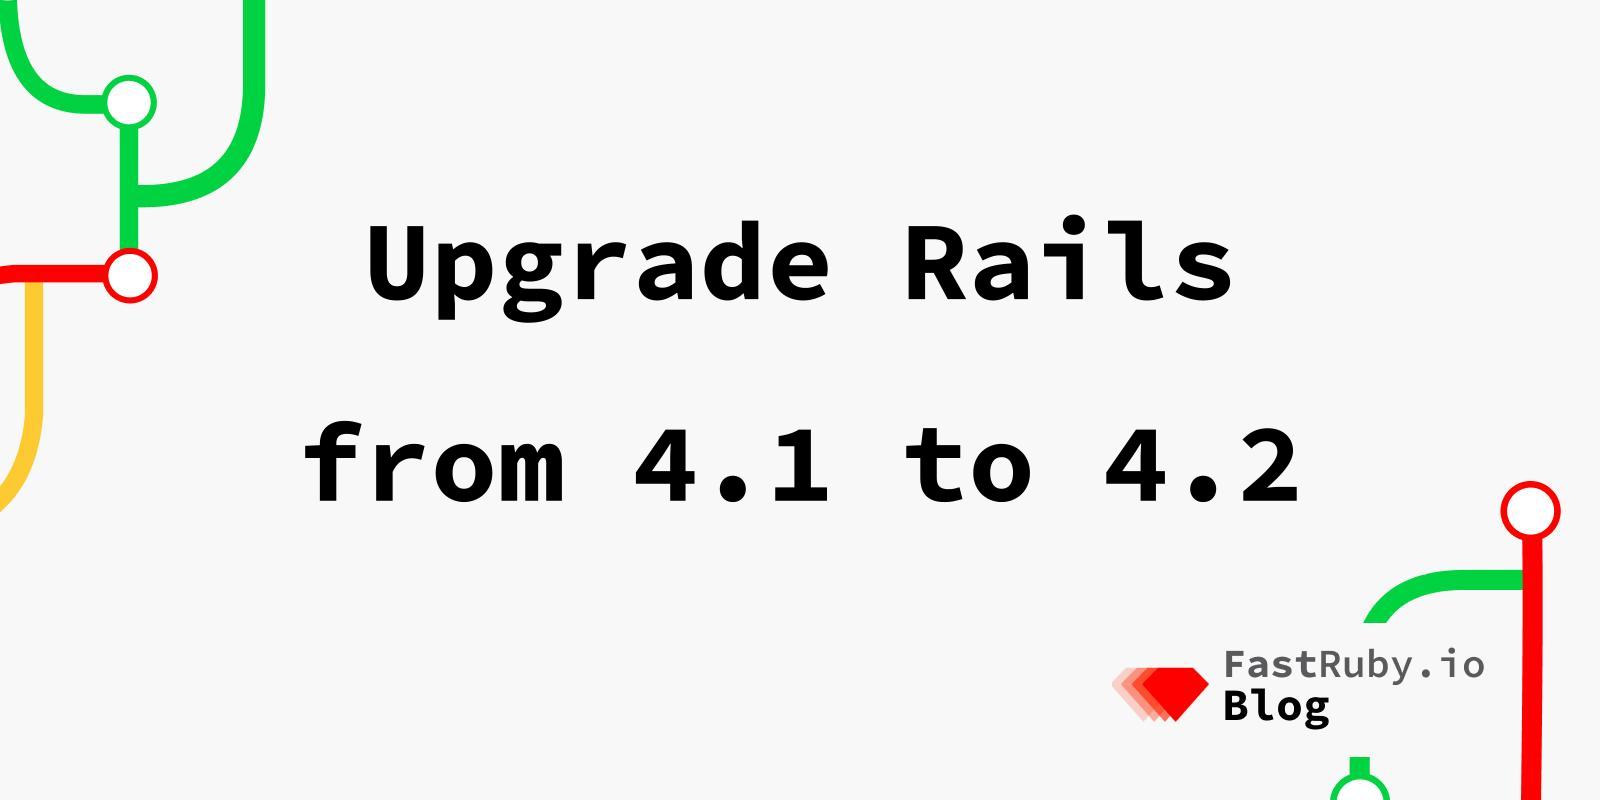 Upgrade Rails from 4.1 to 4.2